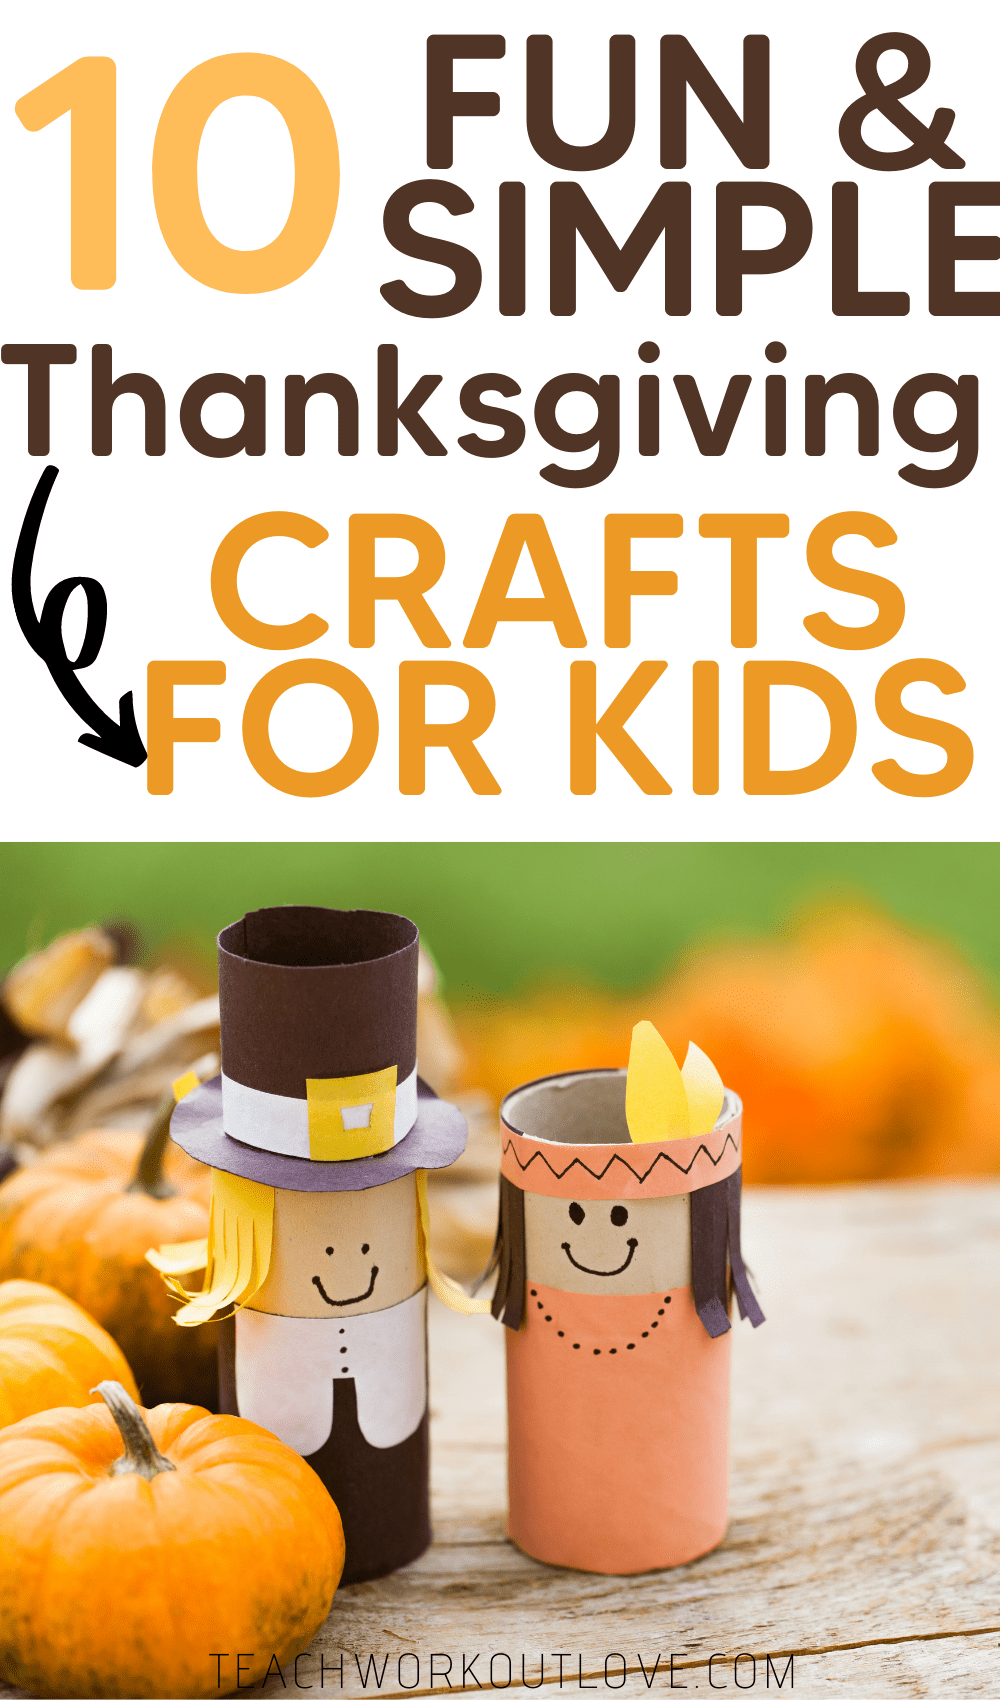 Need some ideas for Thanksgiving crafts for kids? Let's put them on the table and boost their creativity with ten easy and fun crafts.